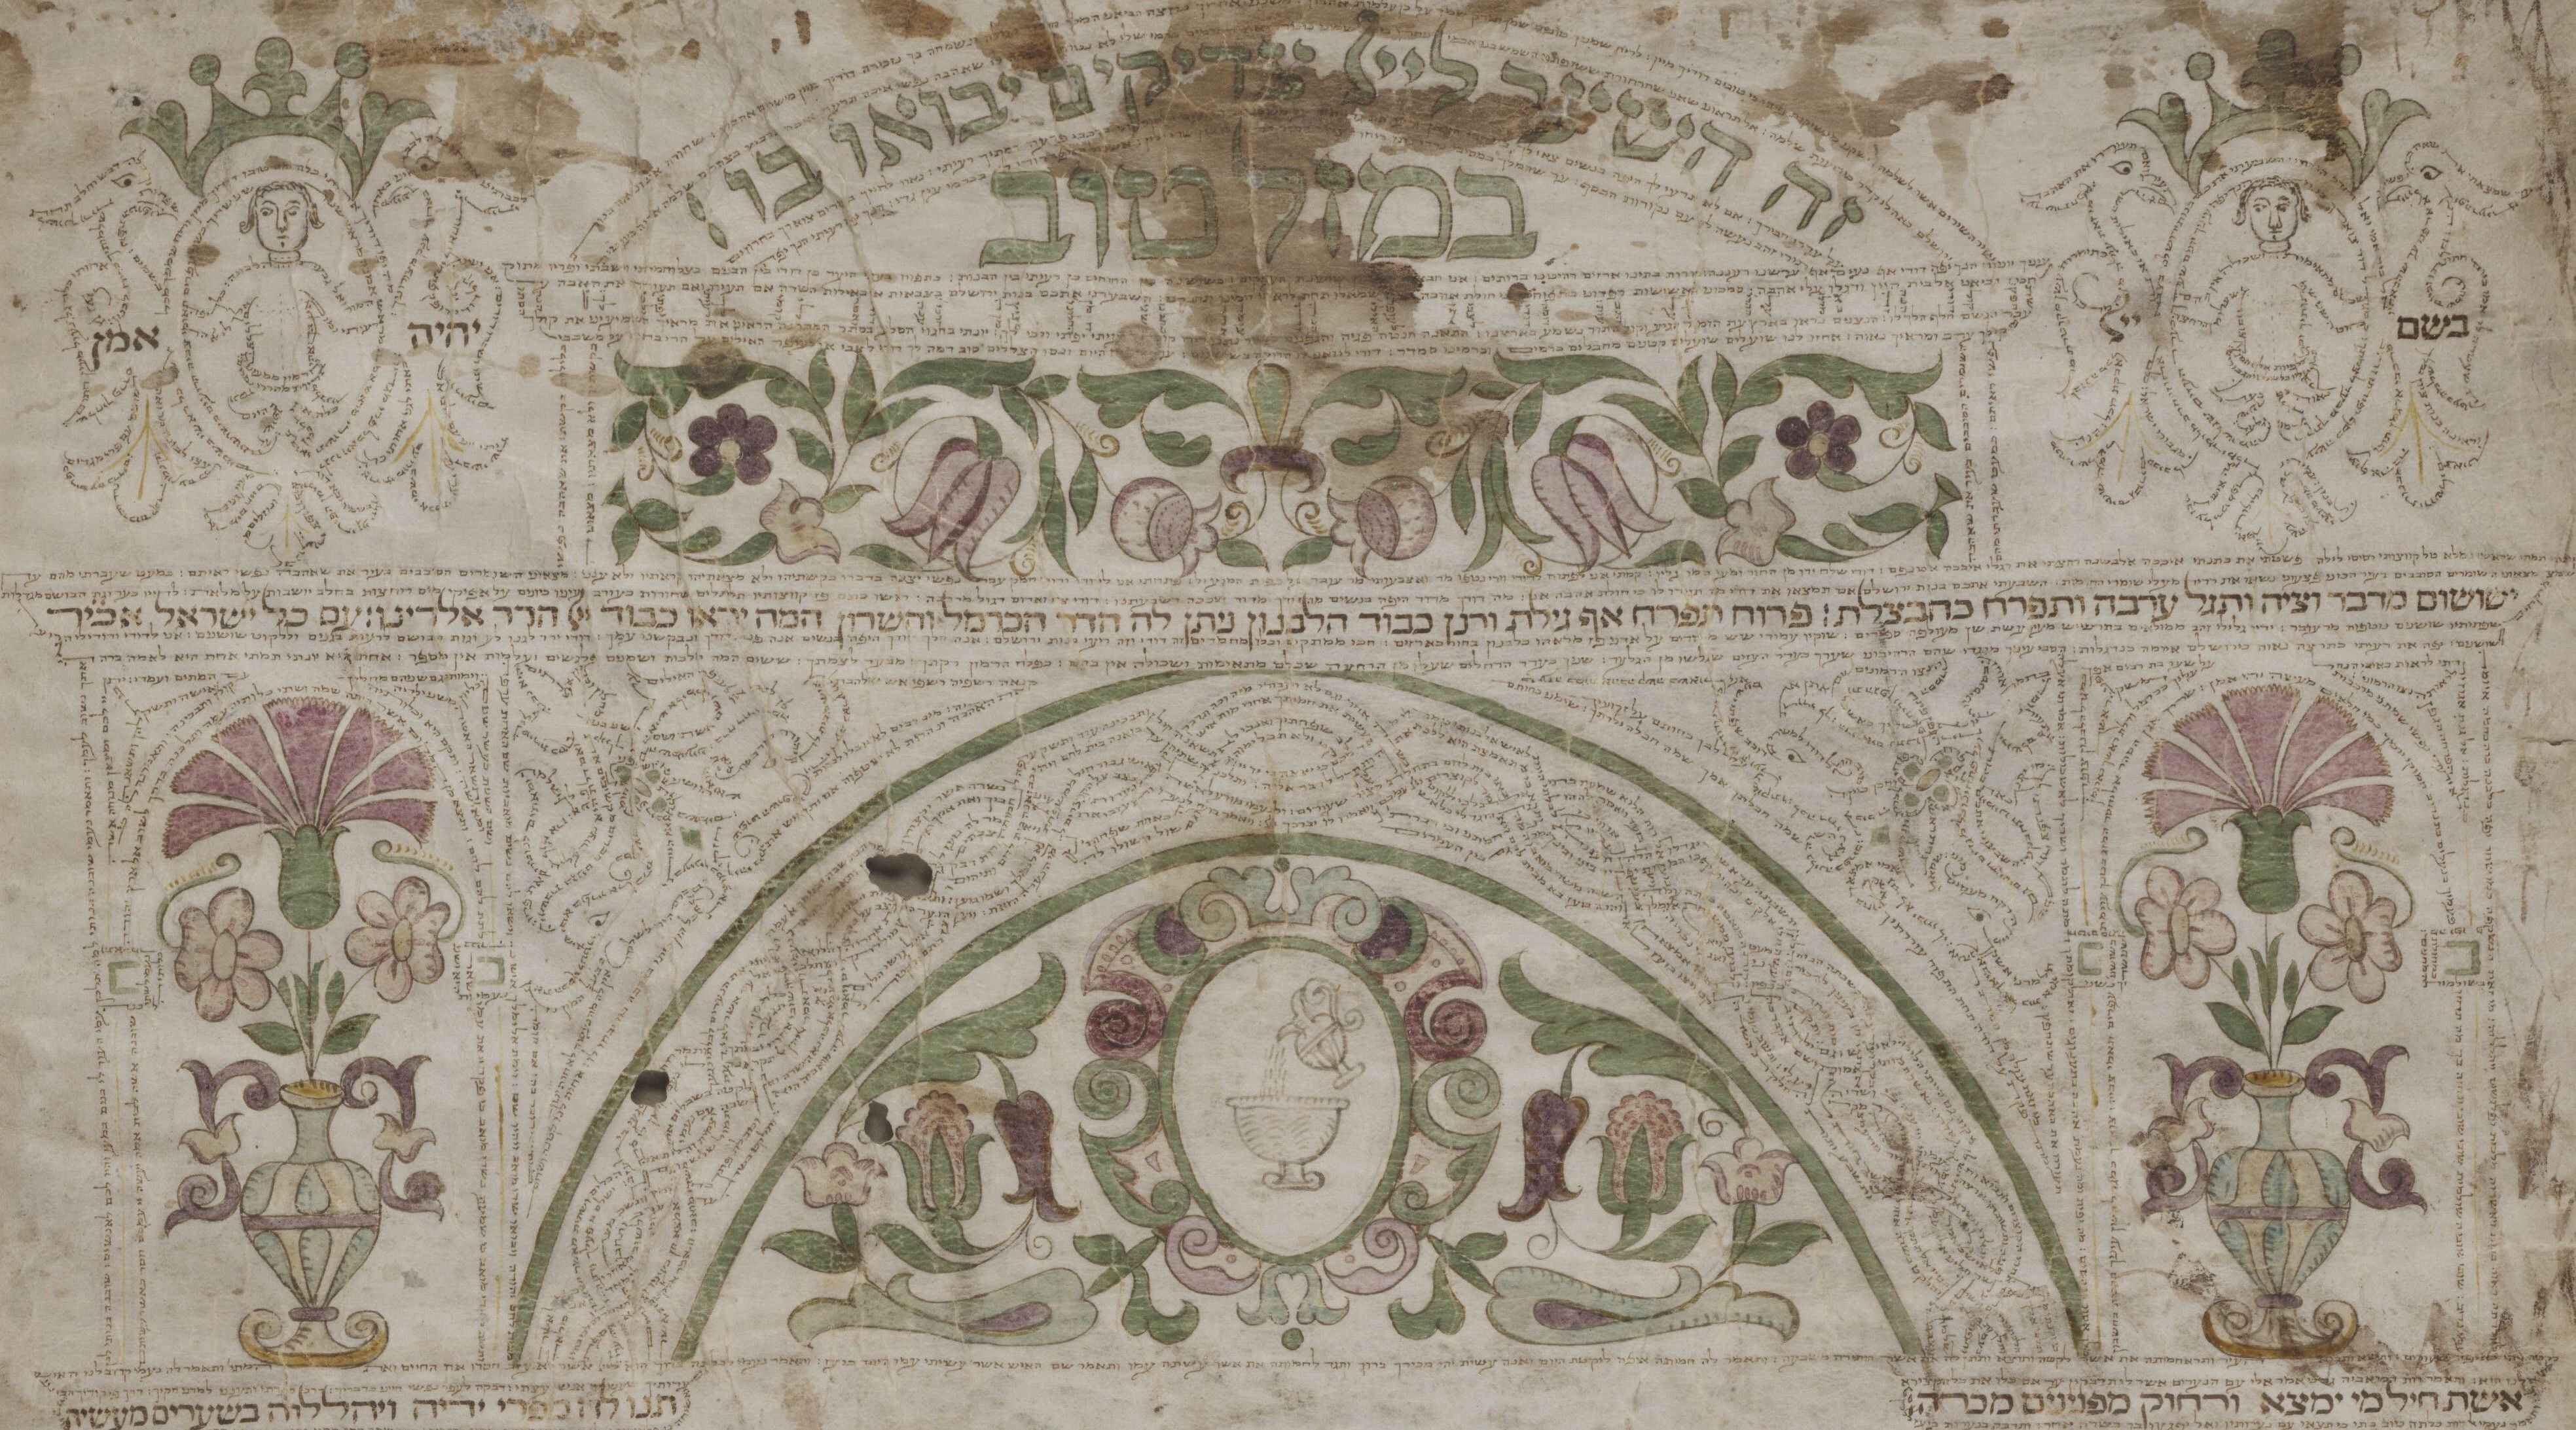 A detail of Hebrew +97 showing floral patters in purple, green, and brown ink. These designs are accompanied by linear patters made up of very tiny Hebrew writing. 